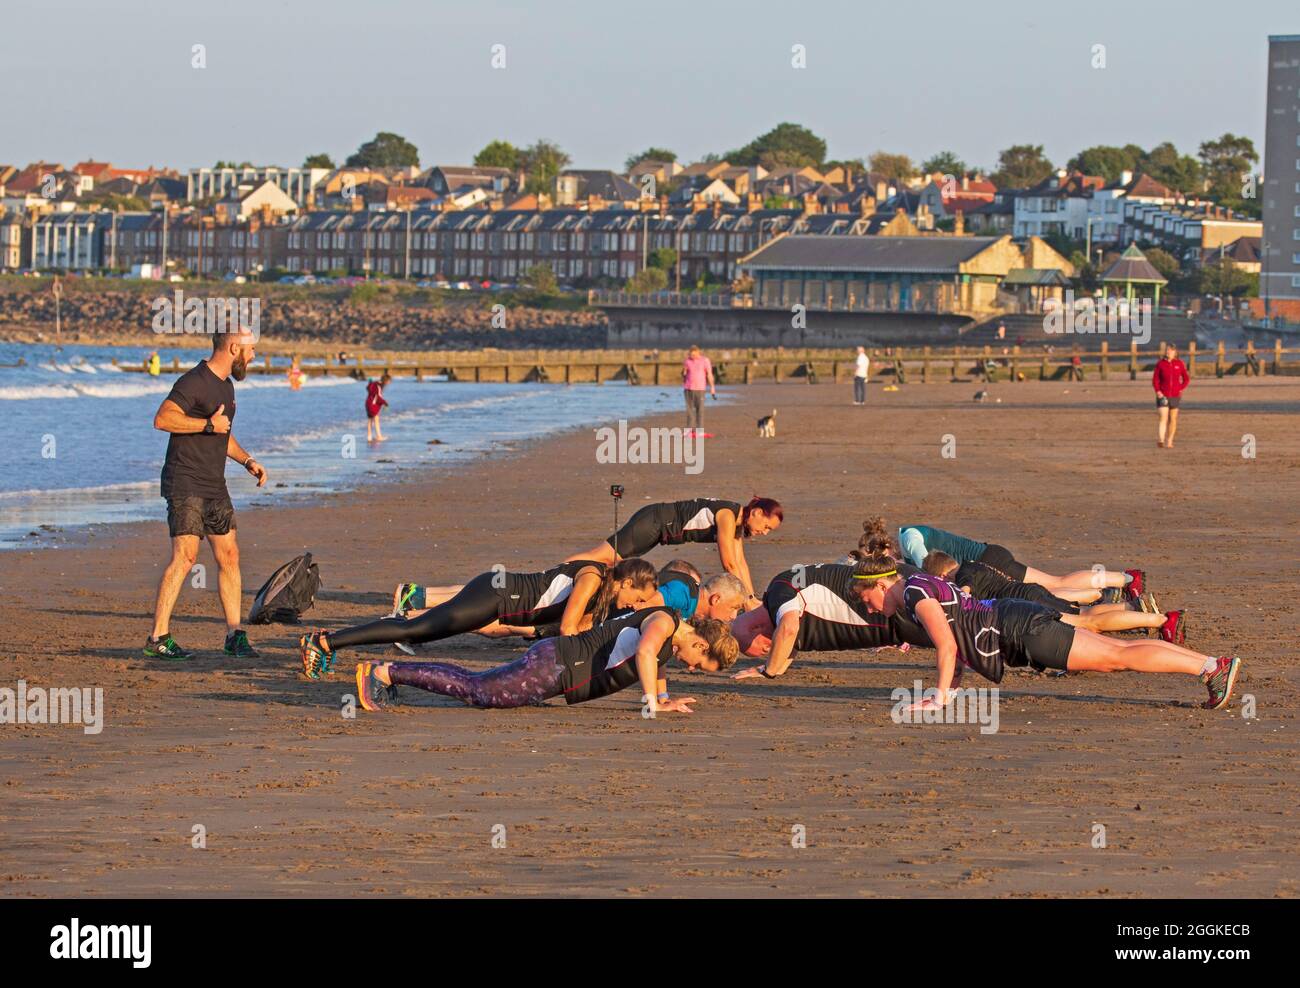 Forth. Temperature 17 degrees. Credit: Arch White/Alamy Live News Stock Photo